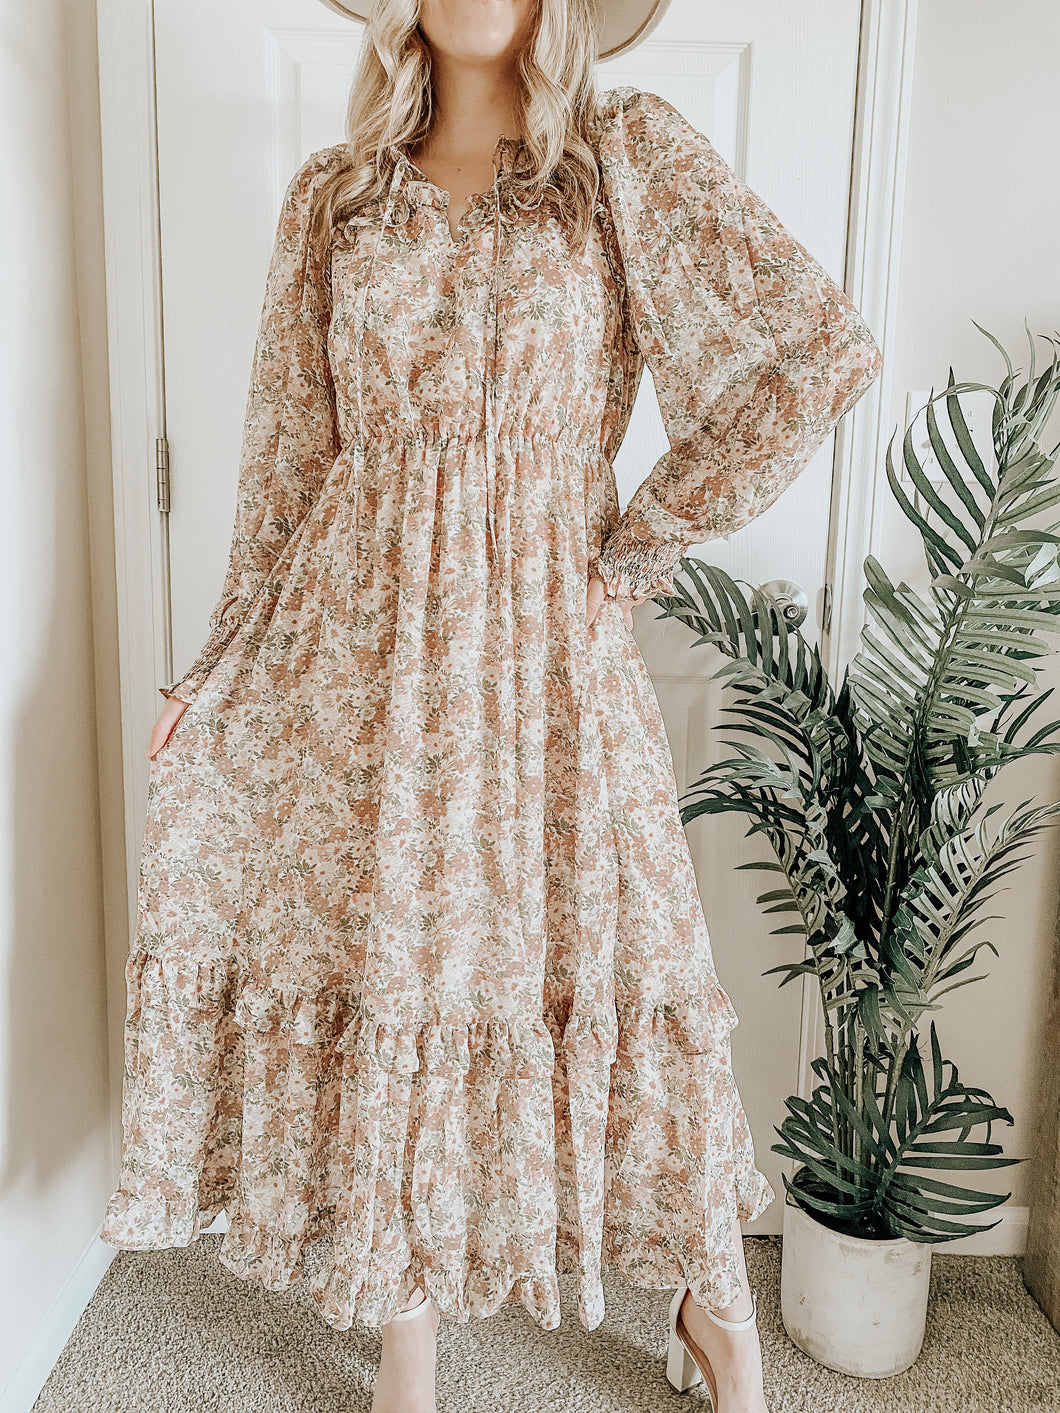 Sweet Blessings Floral Dress